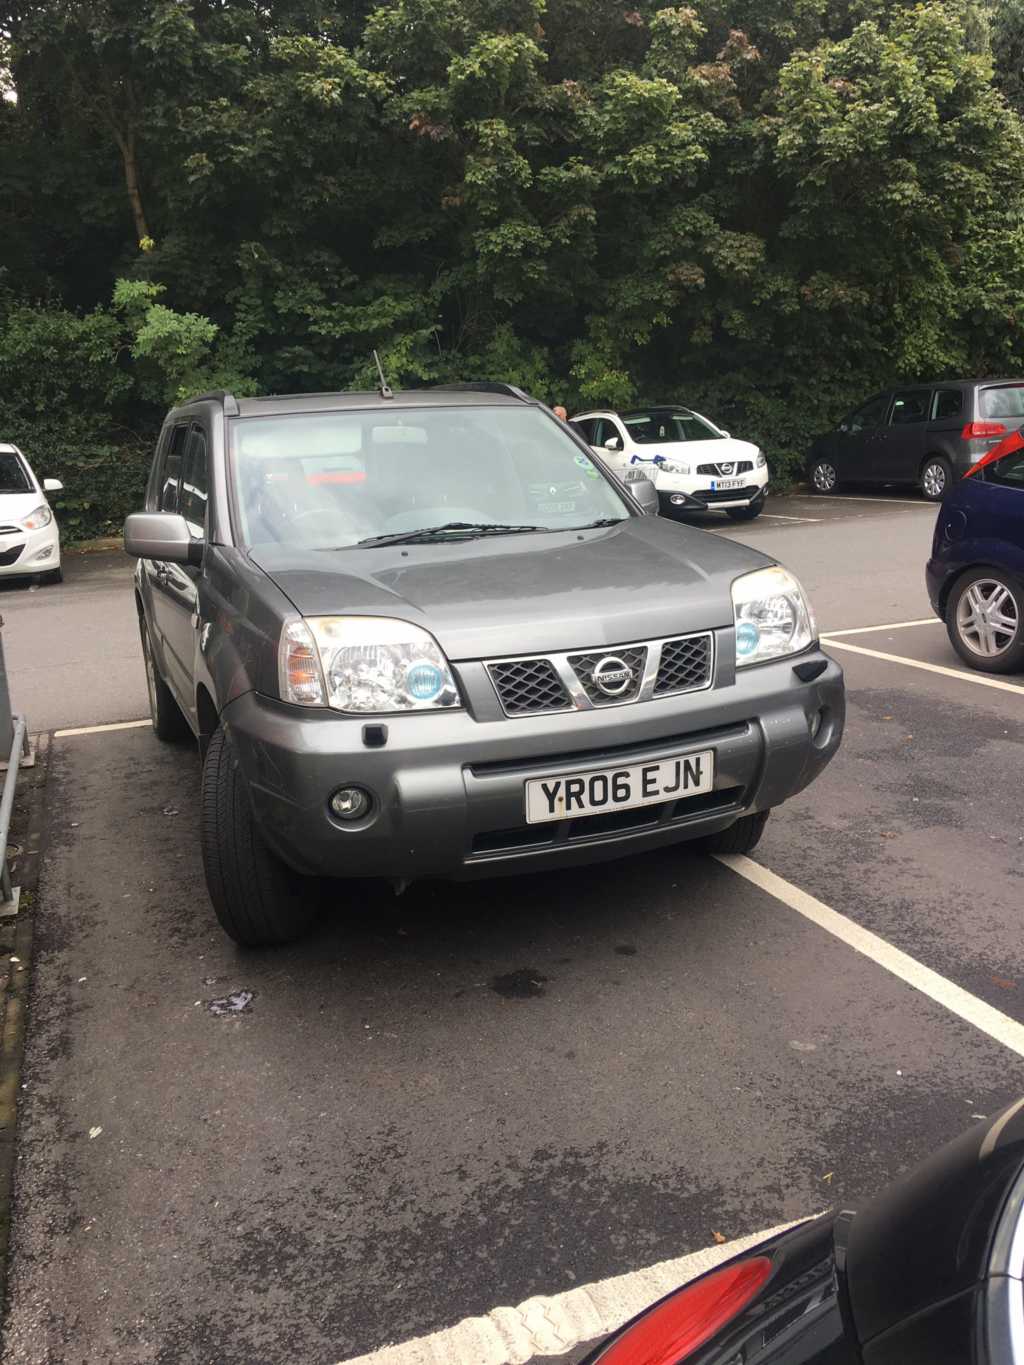 YR06 EJN is an Inconsiderate Parker